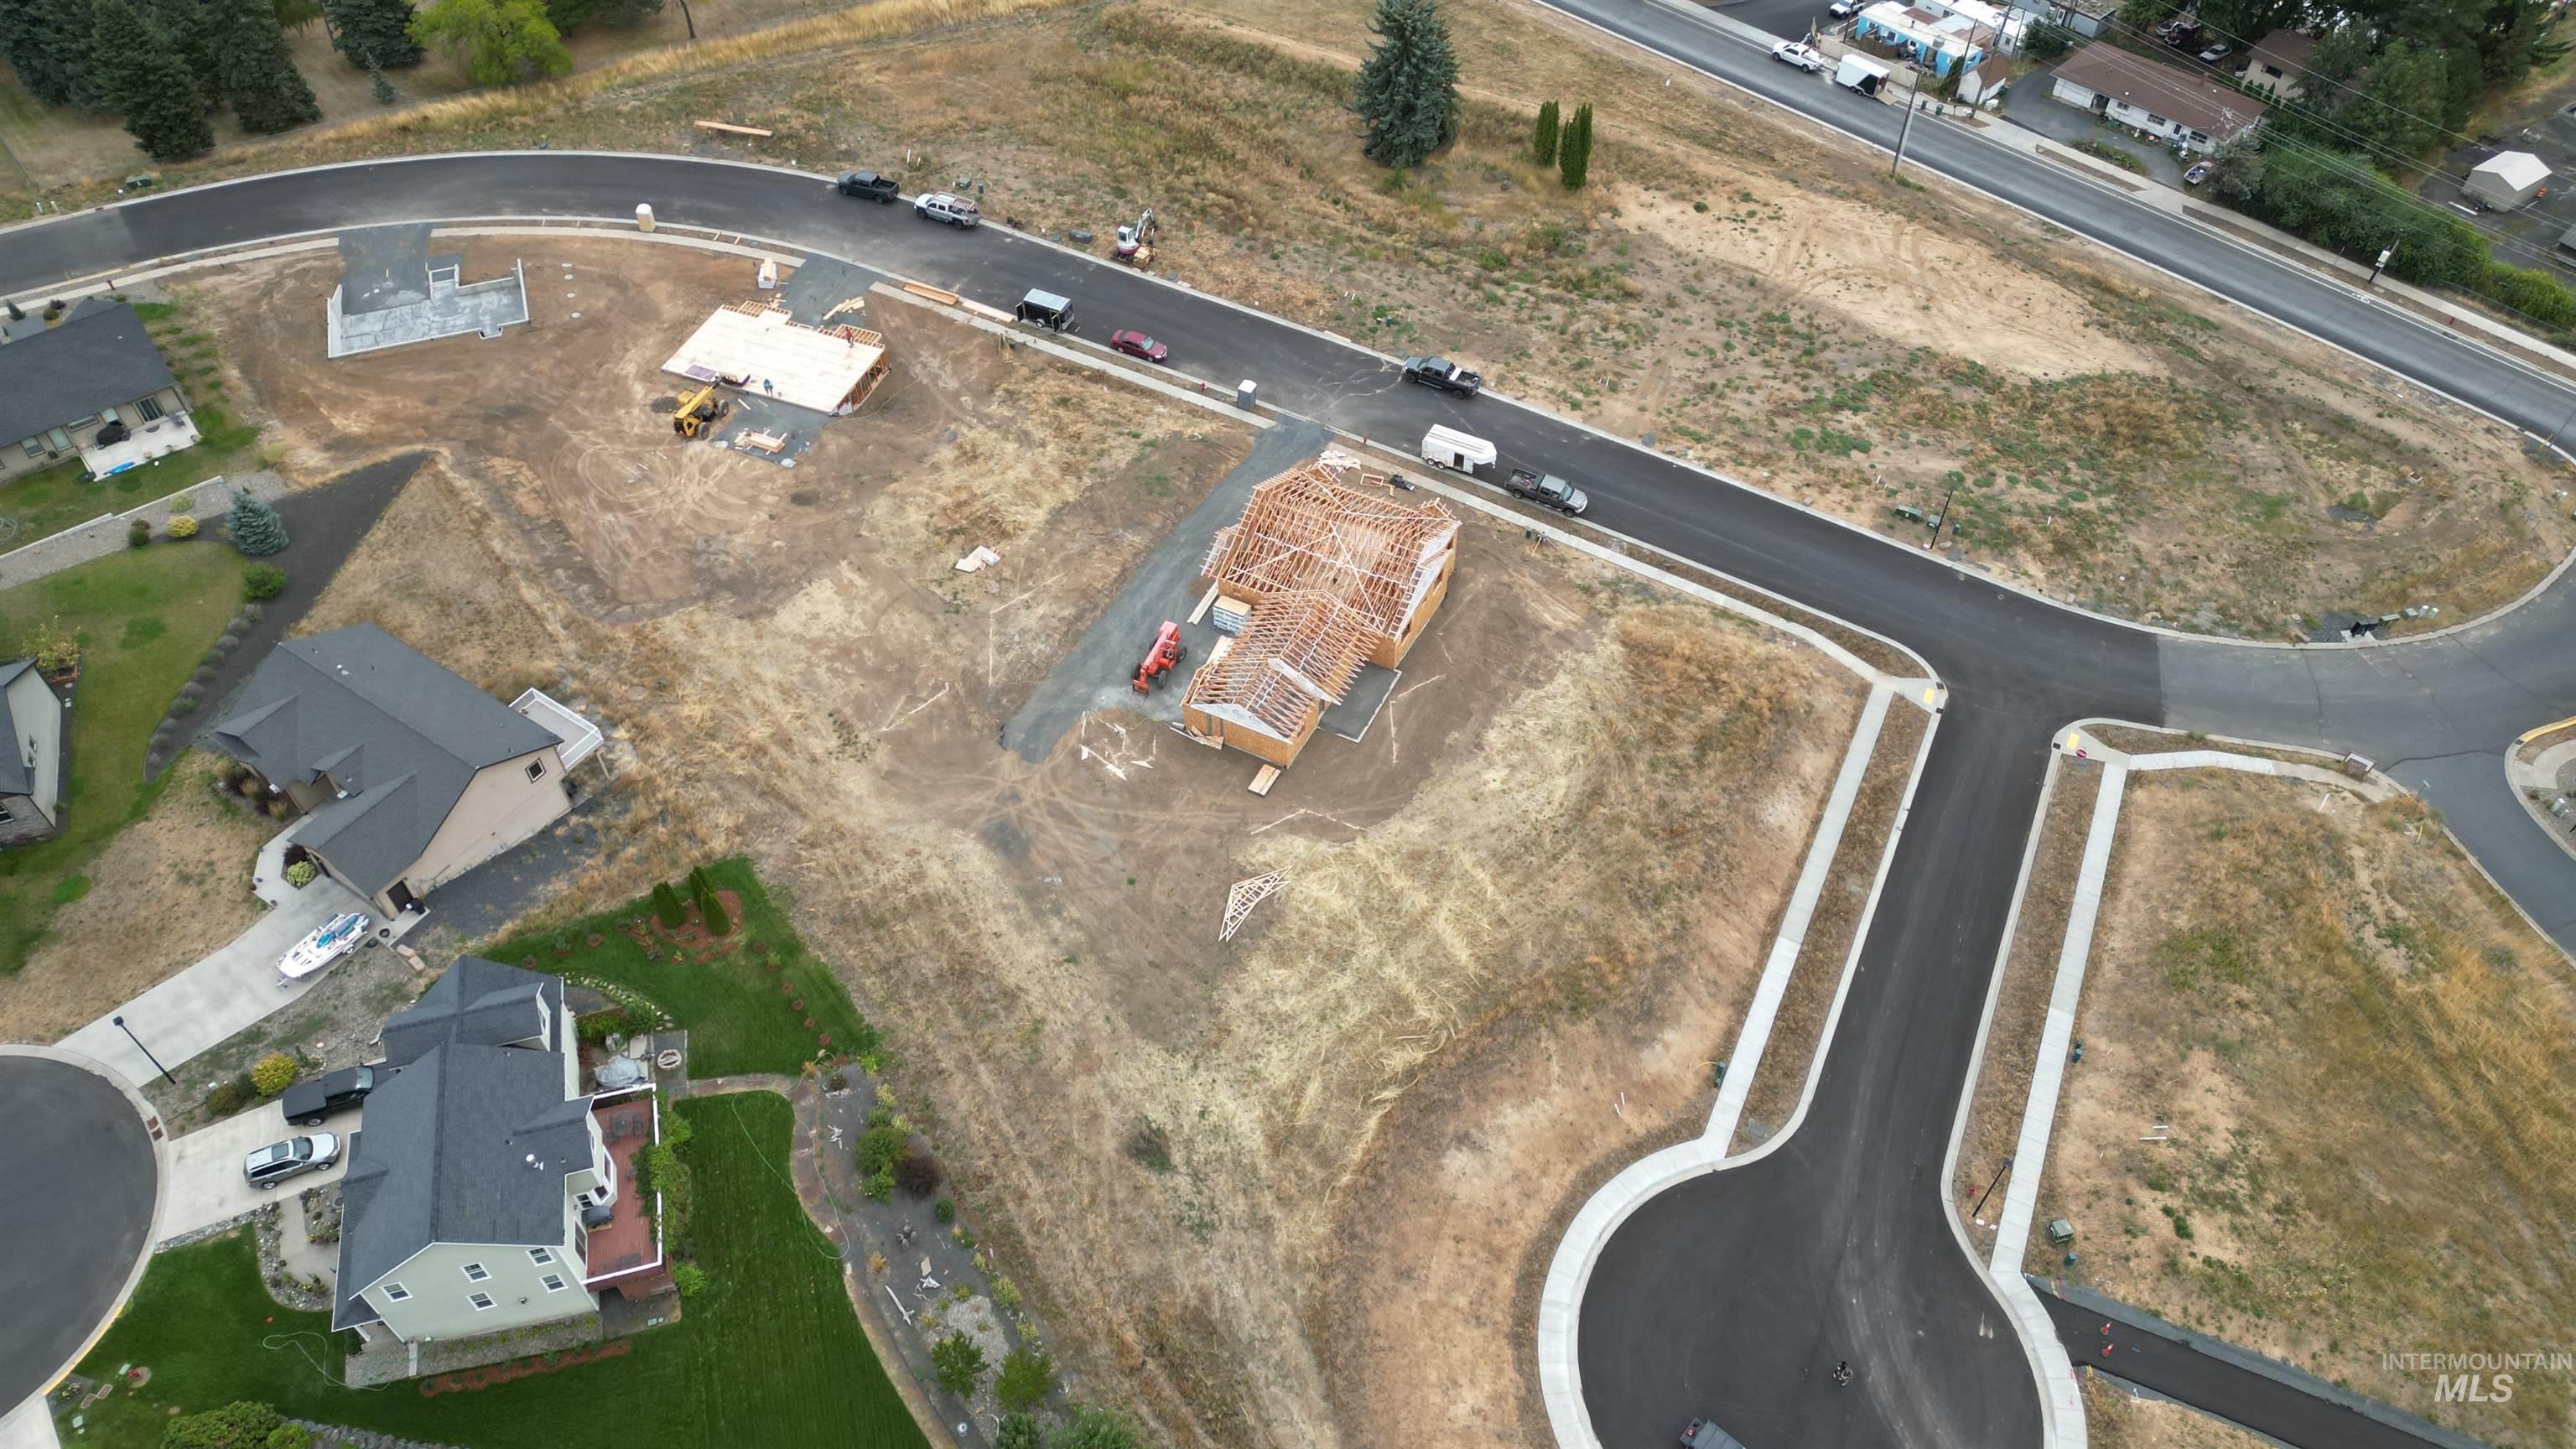 1998 Ben Gifford Court, Moscow, Idaho 83843, Land For Sale, Price $160,000,MLS 98888861